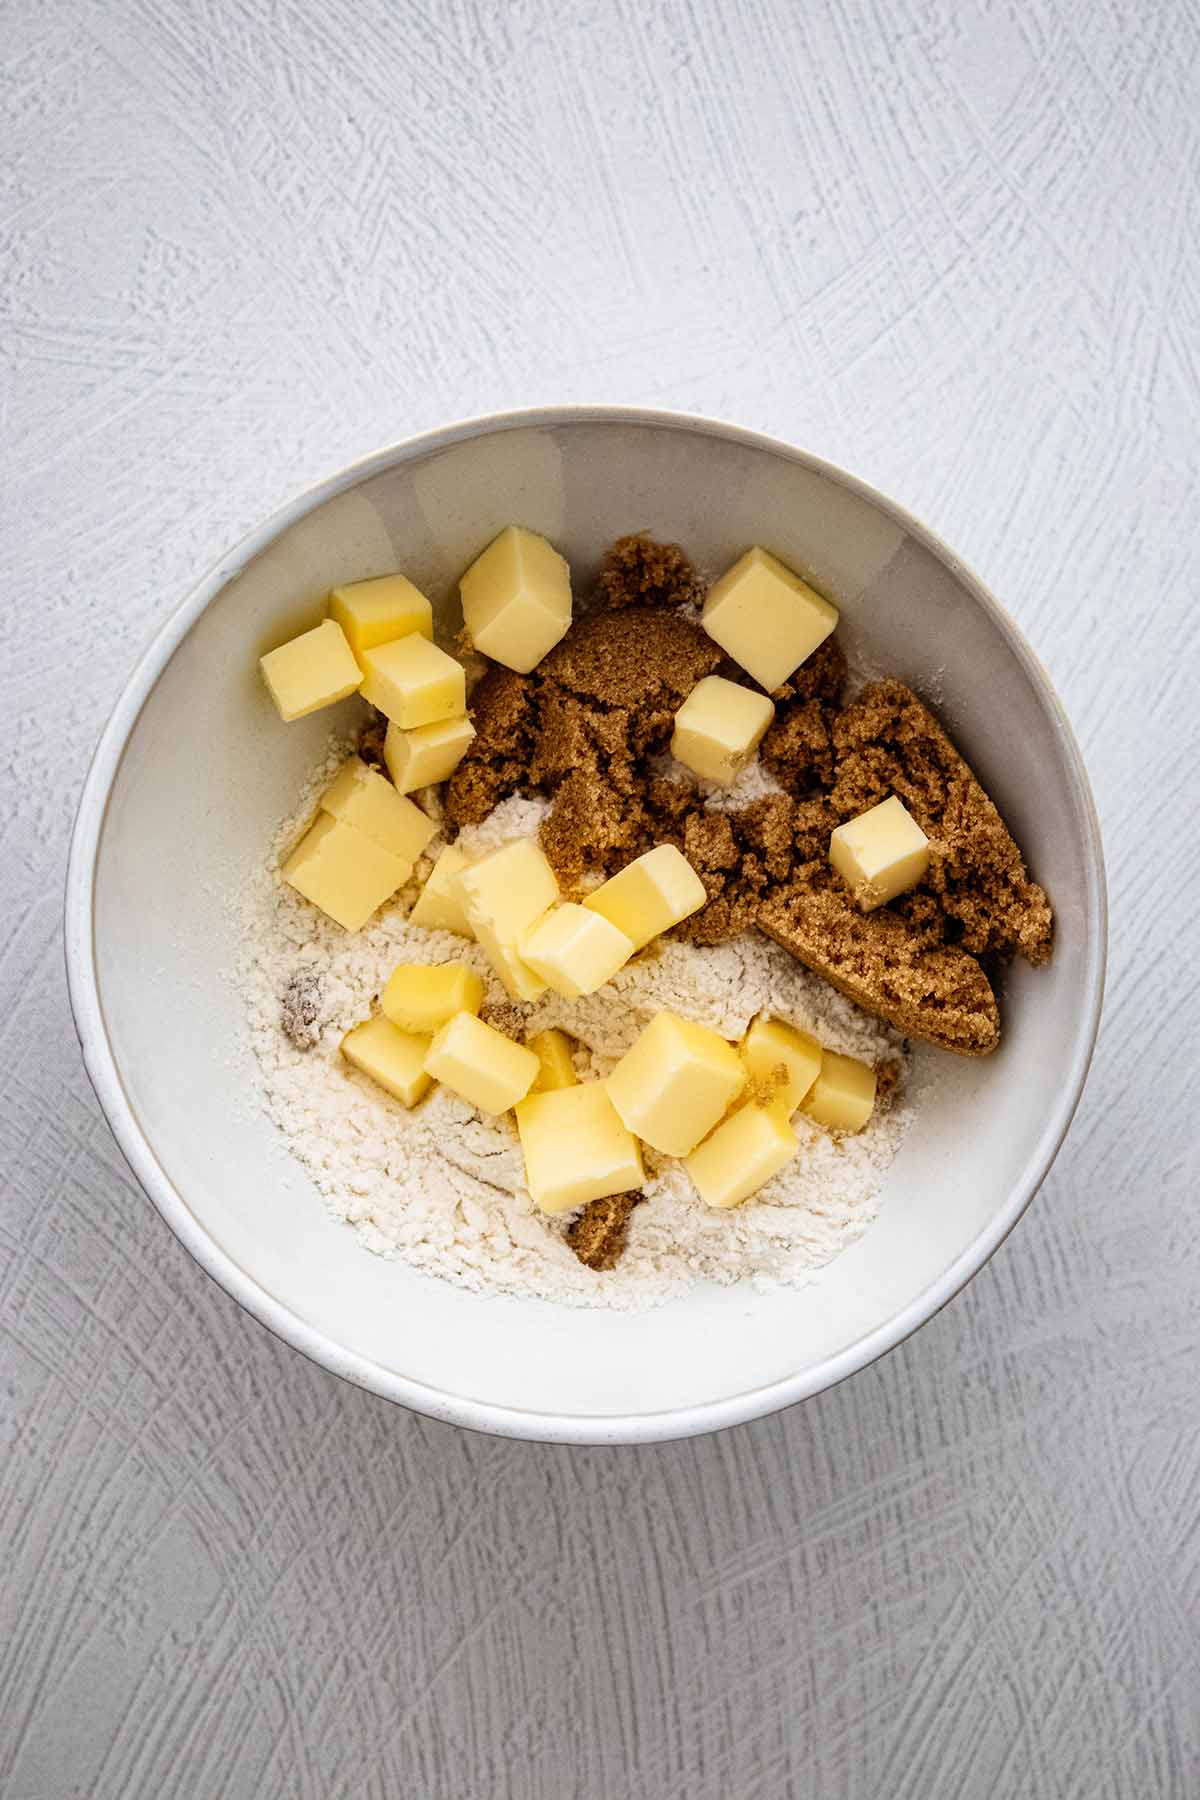 Crumble topping ingredients in a small white bowl.